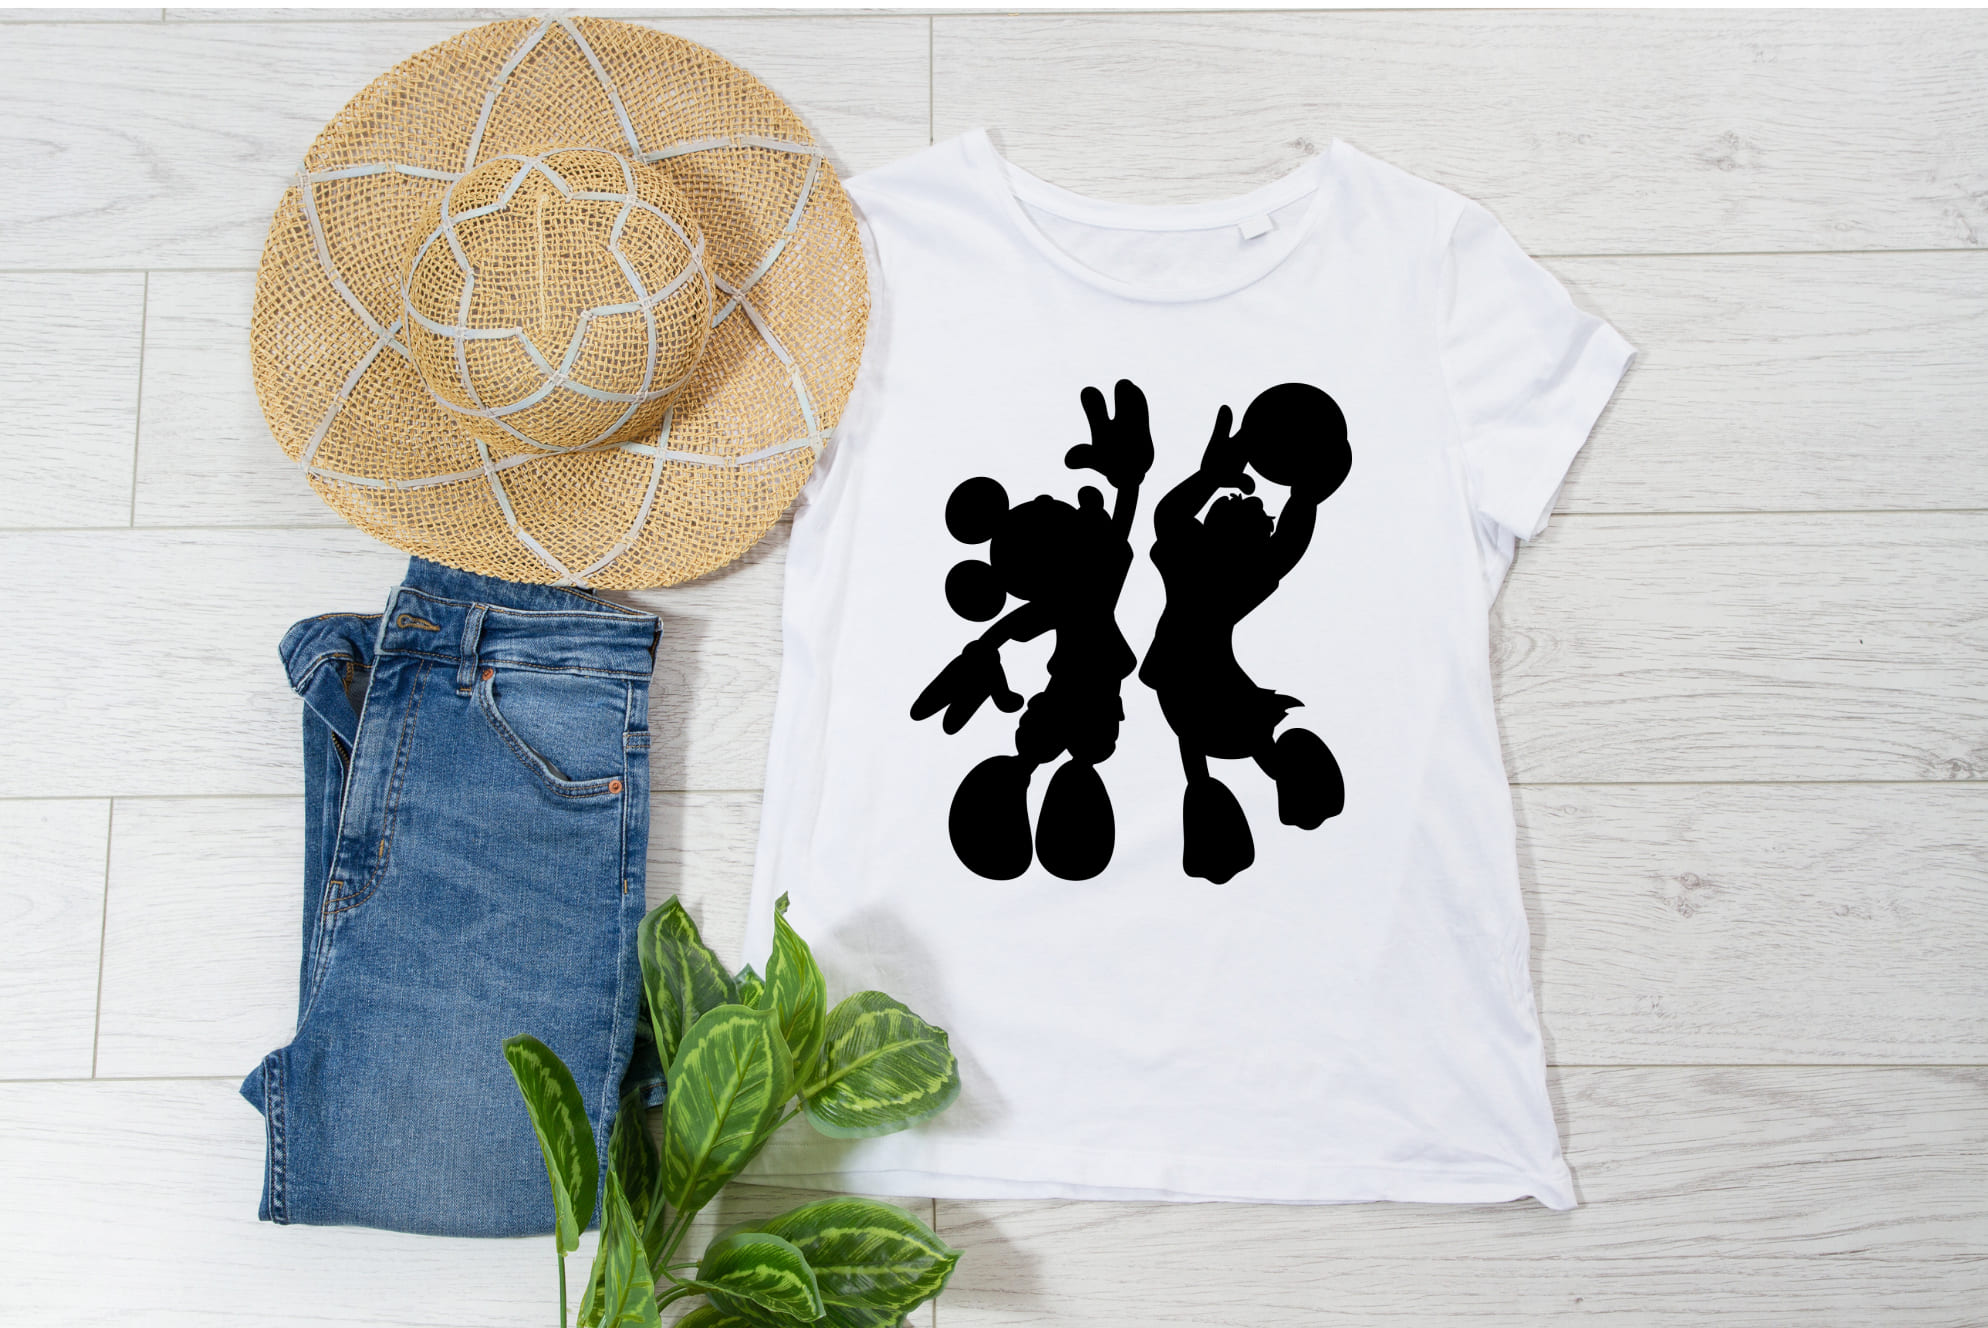 Cool silhouette mickey mouse t-shirt designs.